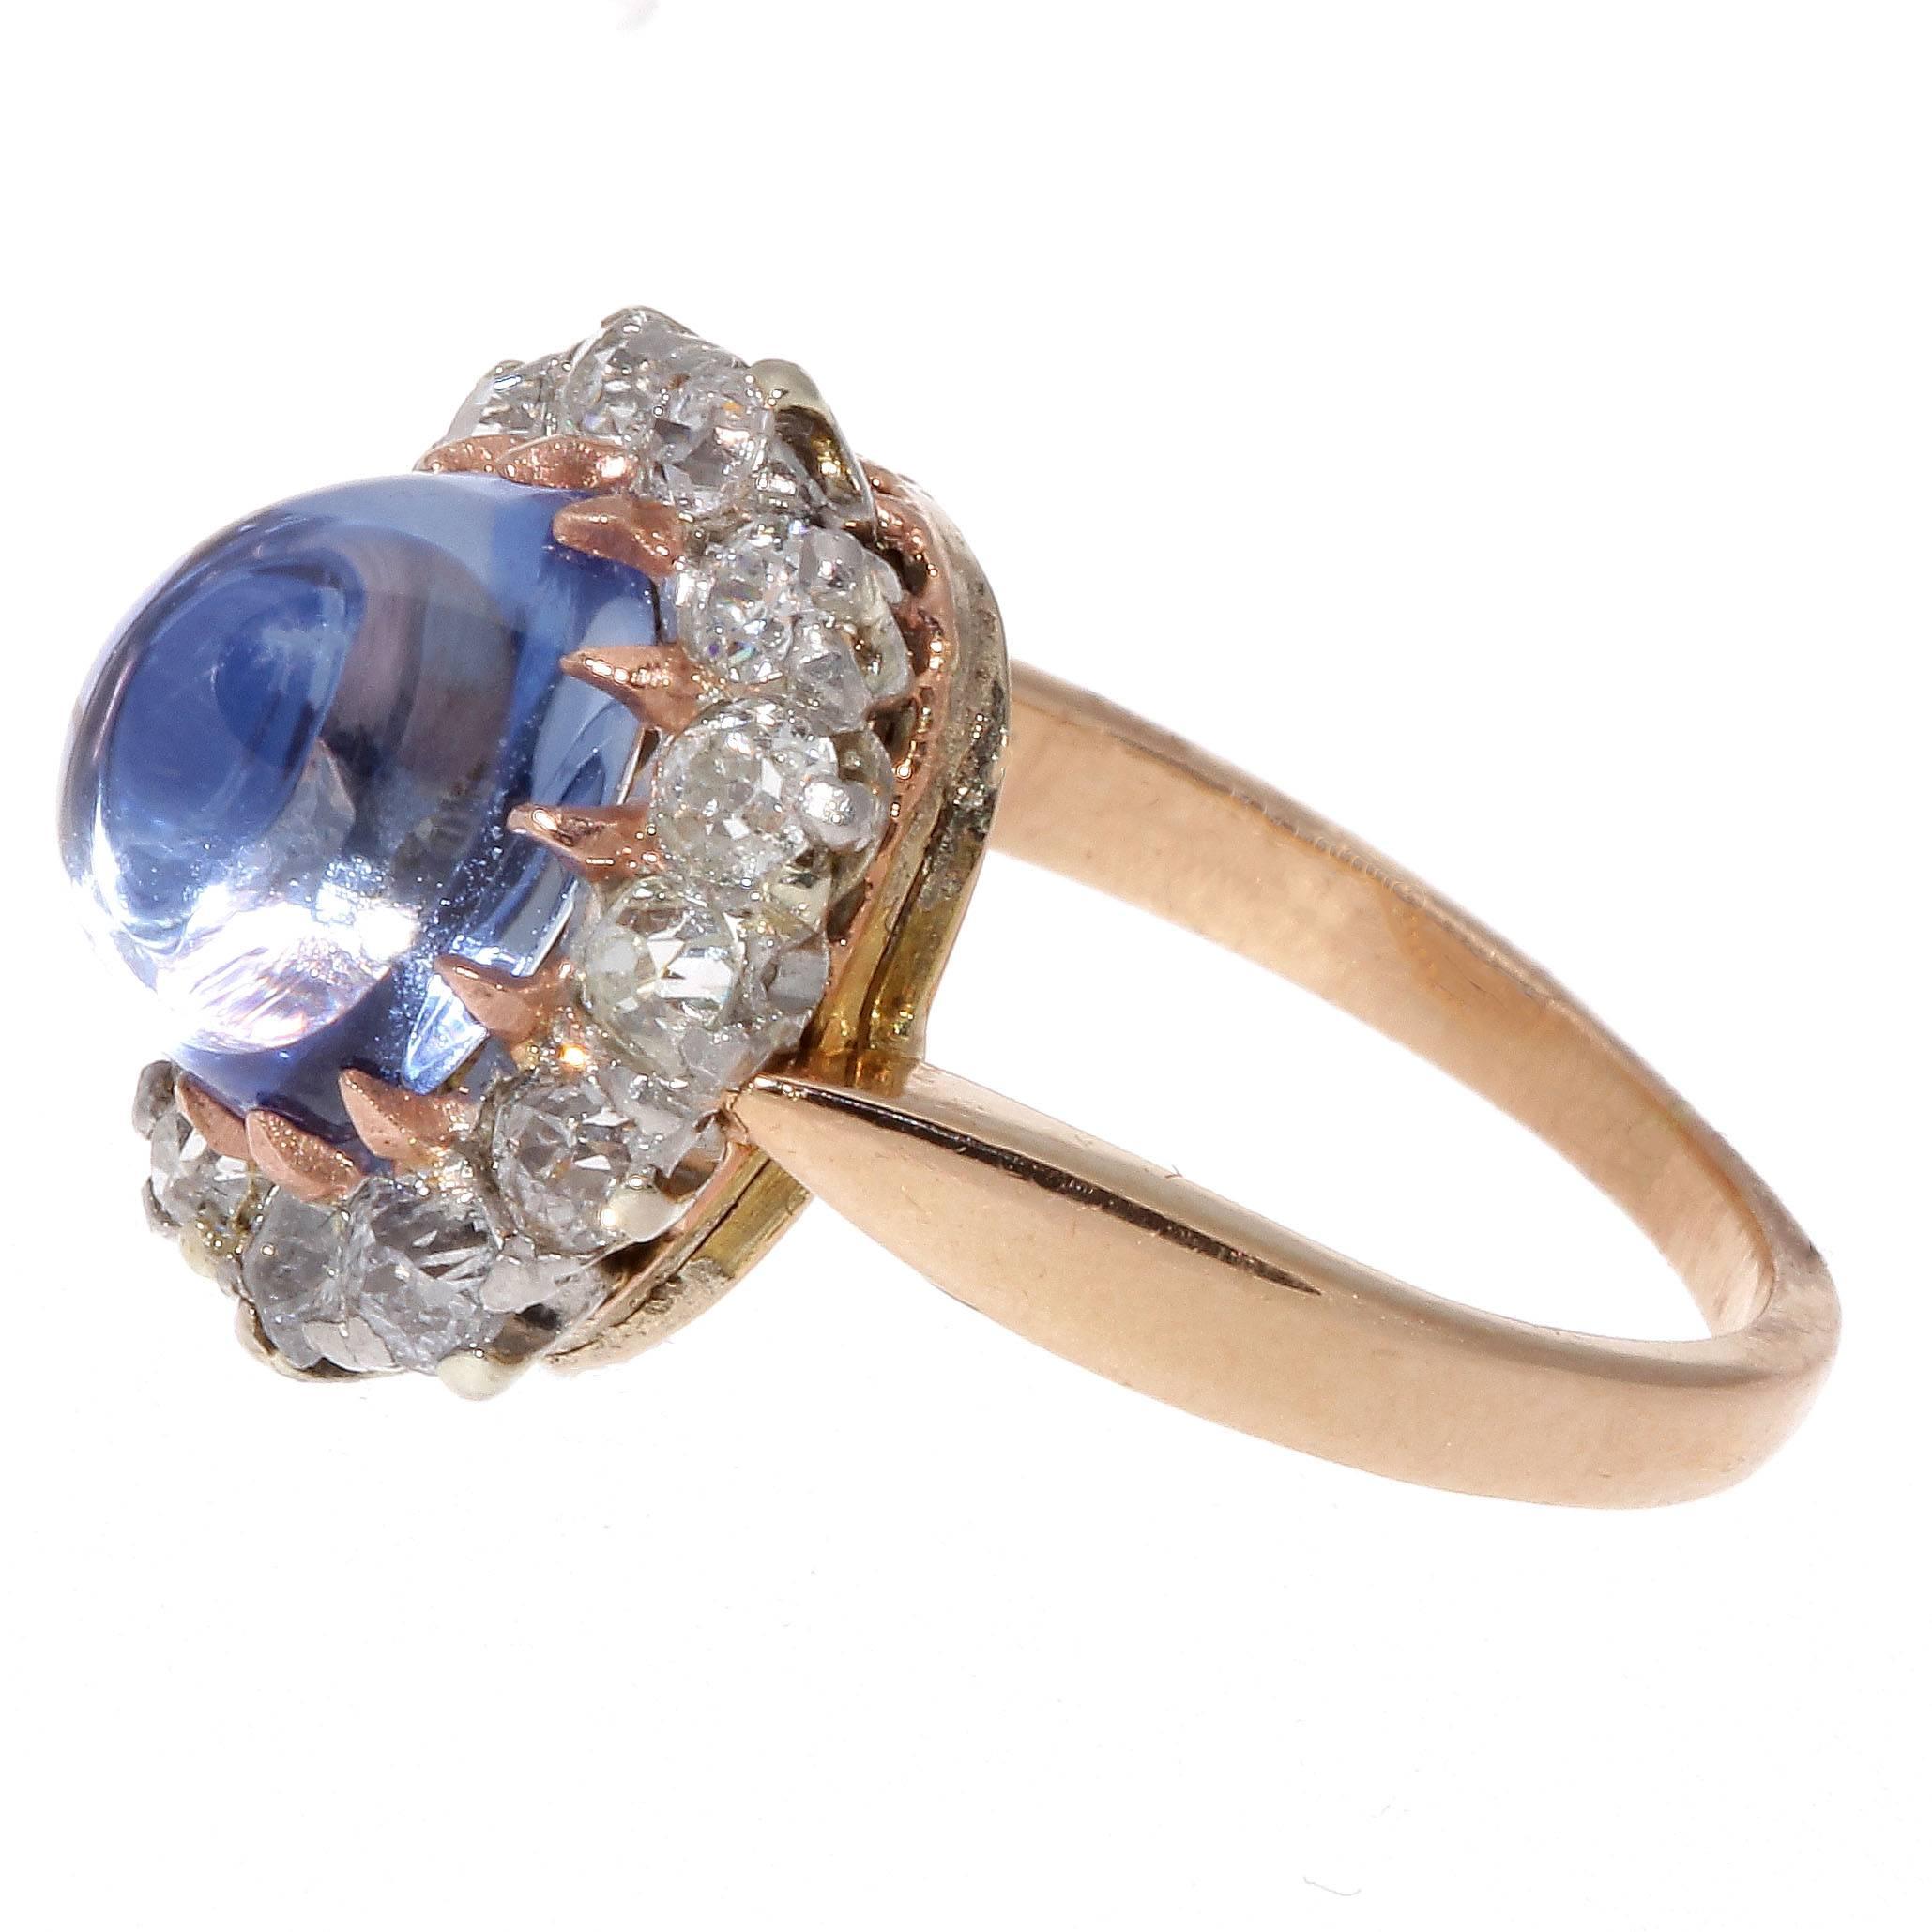 This unusual cut cabochon sapphire makes the ring not only rare but unique in style. Featuring a sparkling and finely finished cornflower blue sapphire that is surrounded by a halo of old cut diamonds. Hand crafted in 18k gold.